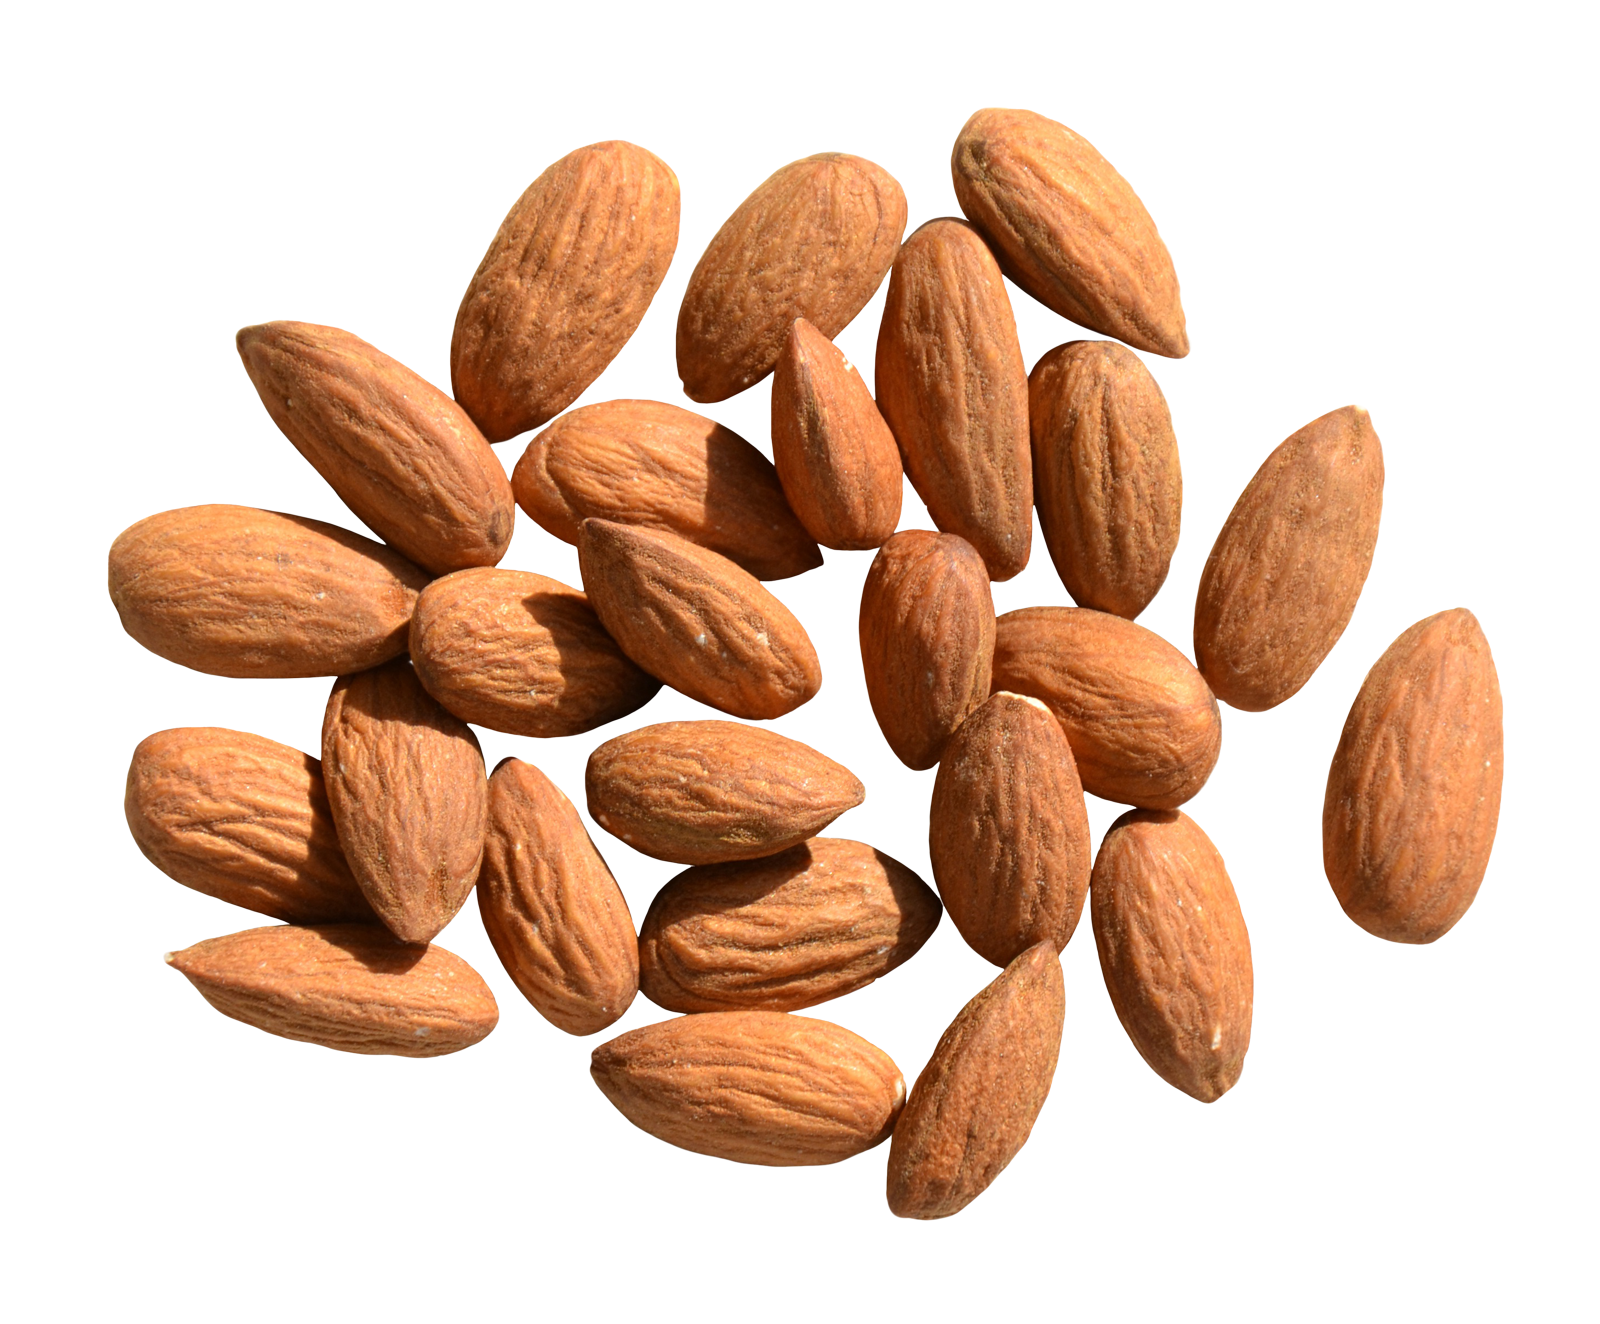 Saman Mamra Almond Kernel Export Company _ Nutex Trading  is one of the large and reputable companies in the field of production and export of Mamra almond kernels in Iran.